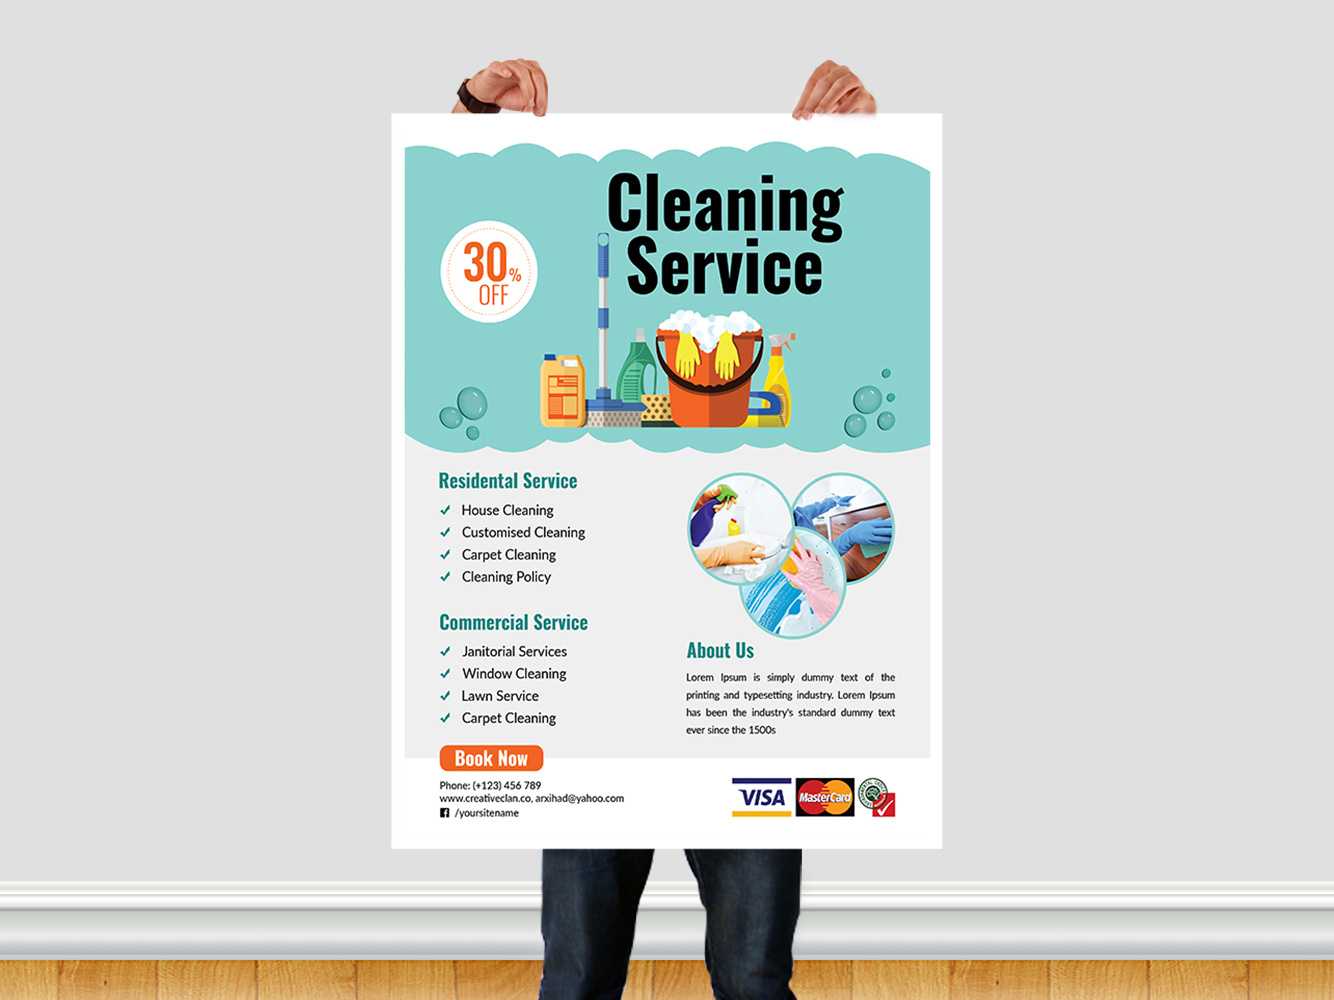 Cleaning Service Flyer Templatear Xihad On Dribbble Regarding Cleaning Company Flyers Template